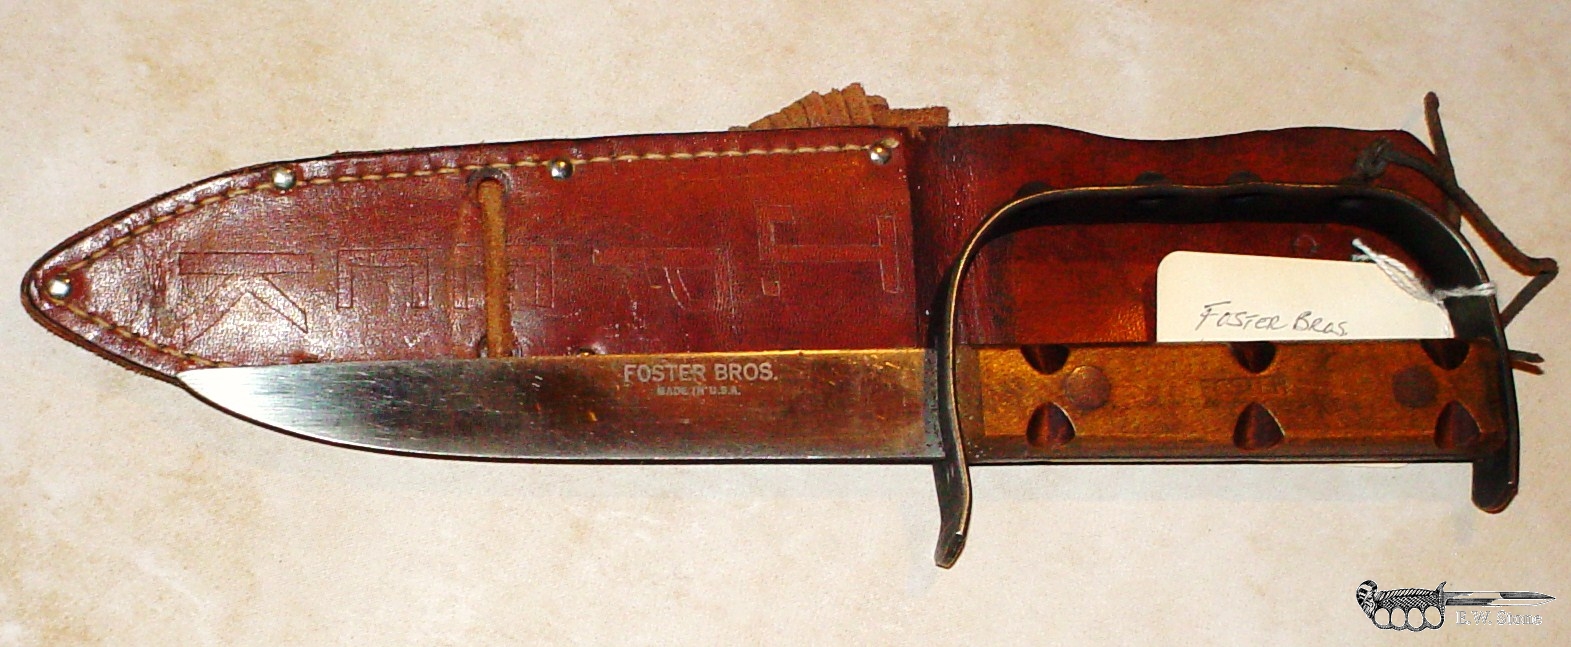 Foster Brothers Knuckle Knife